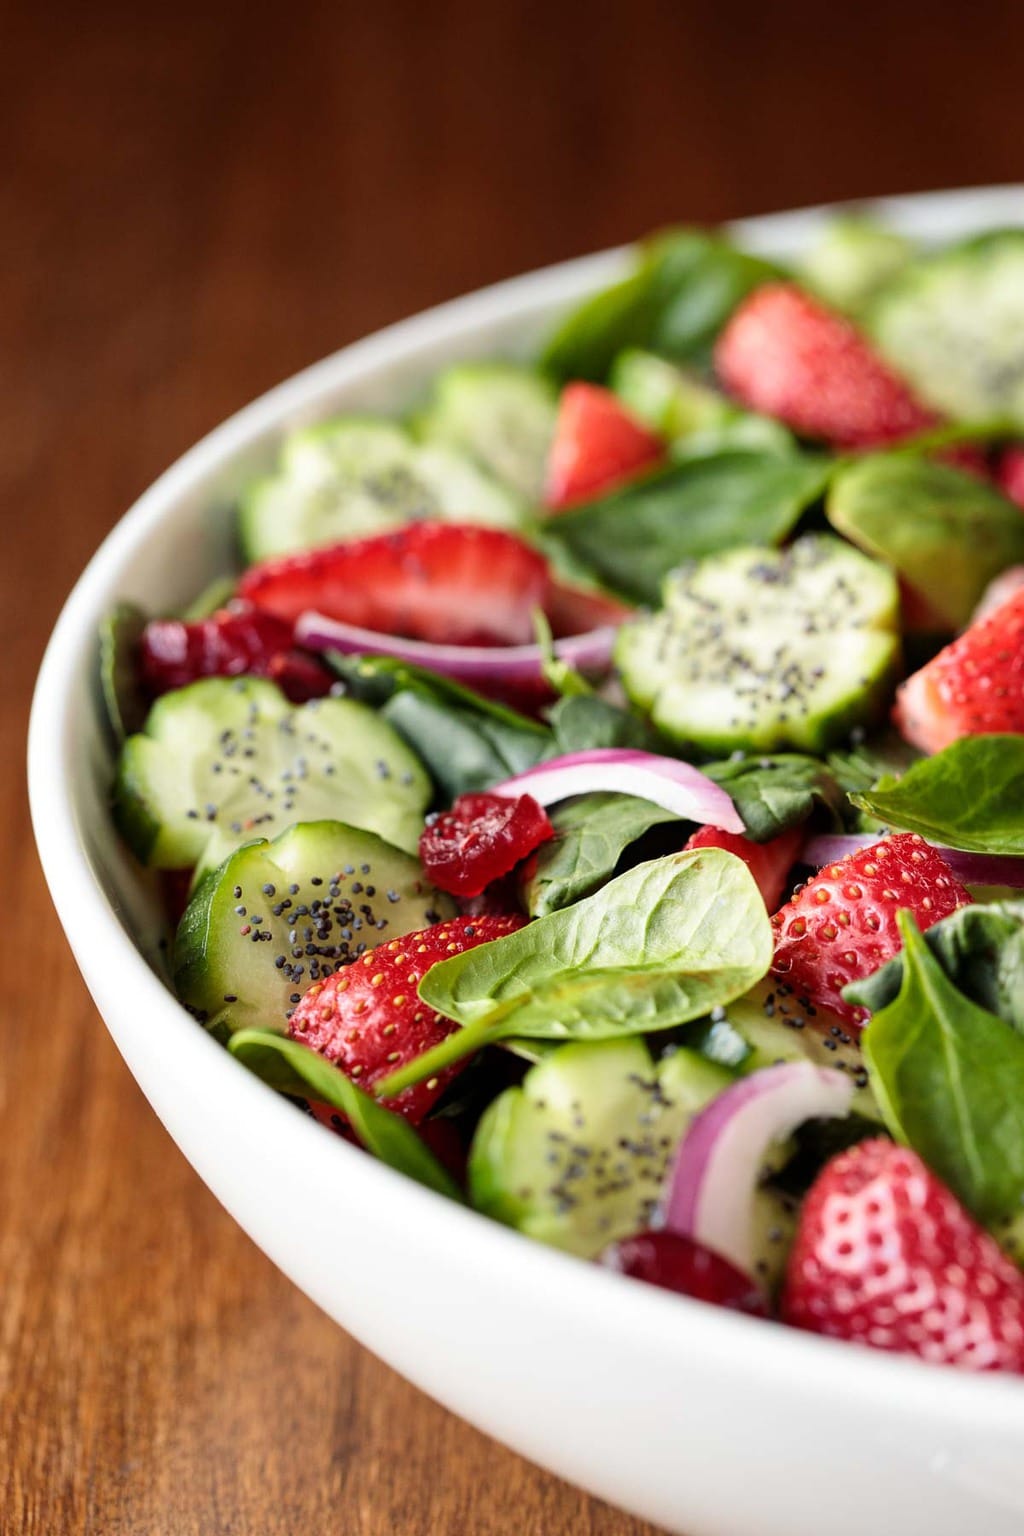 Vertical closeup photo of Strawberry Spinach Salad in a white serving bowl on a wood table.